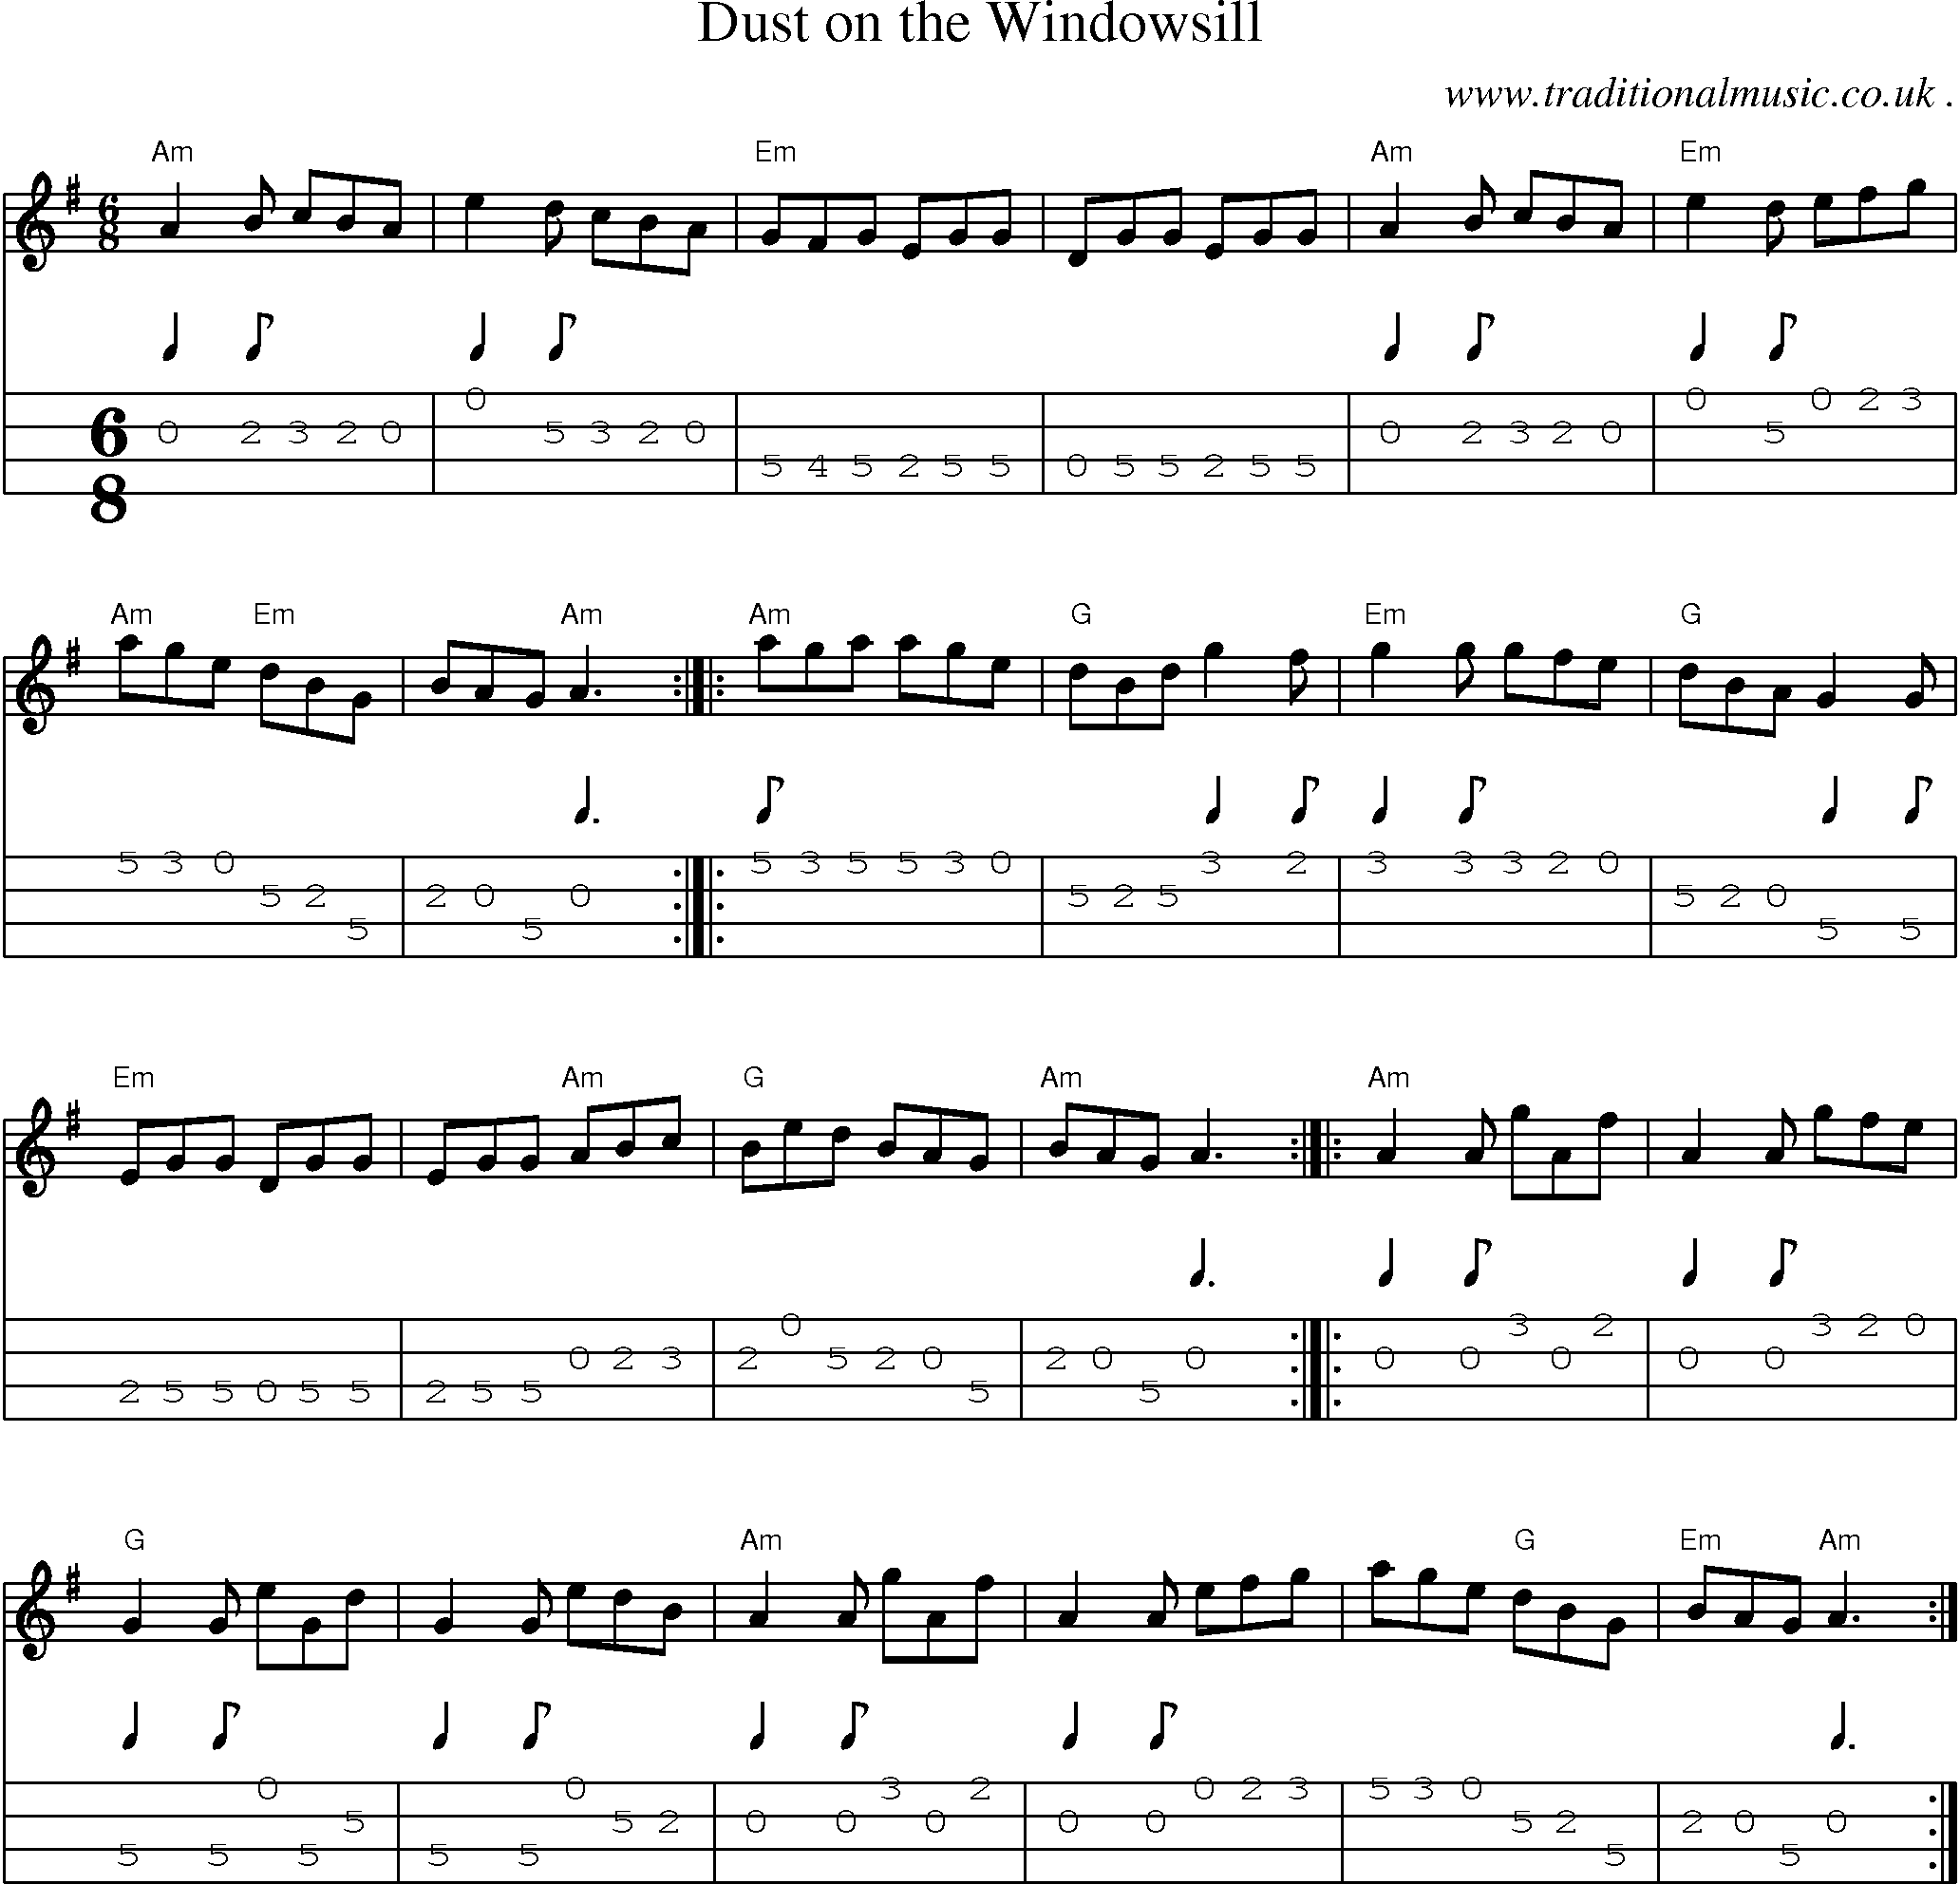 Music Score and Guitar Tabs for Dust On The Windowsill